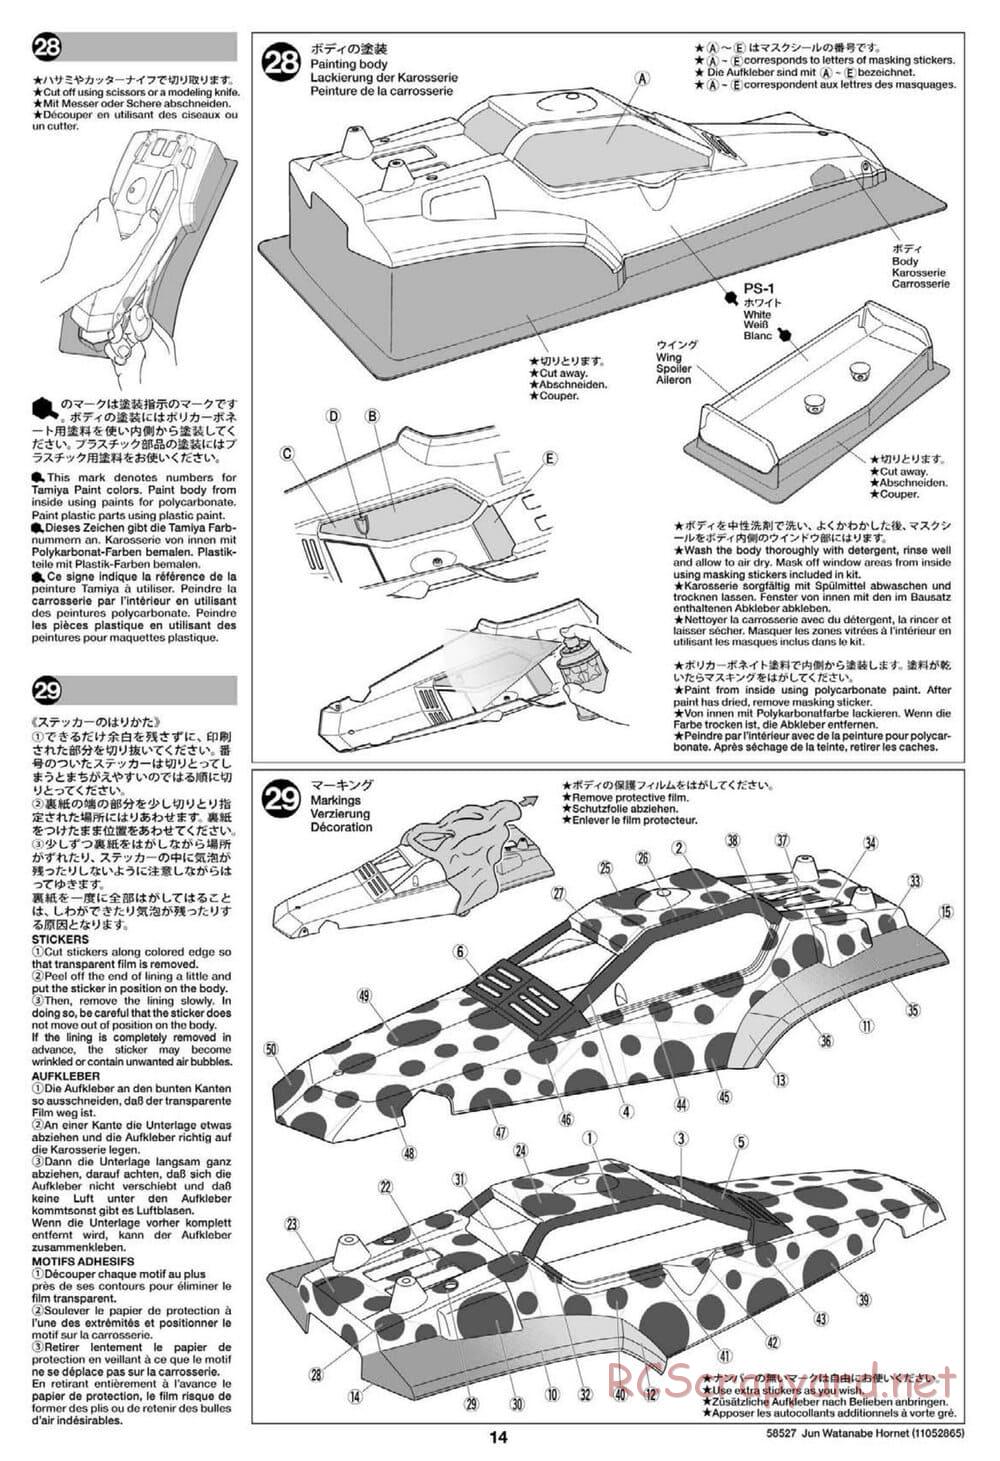 Tamiya - The Hornet by Jun Watanabe - GH Chassis - Manual - Page 14